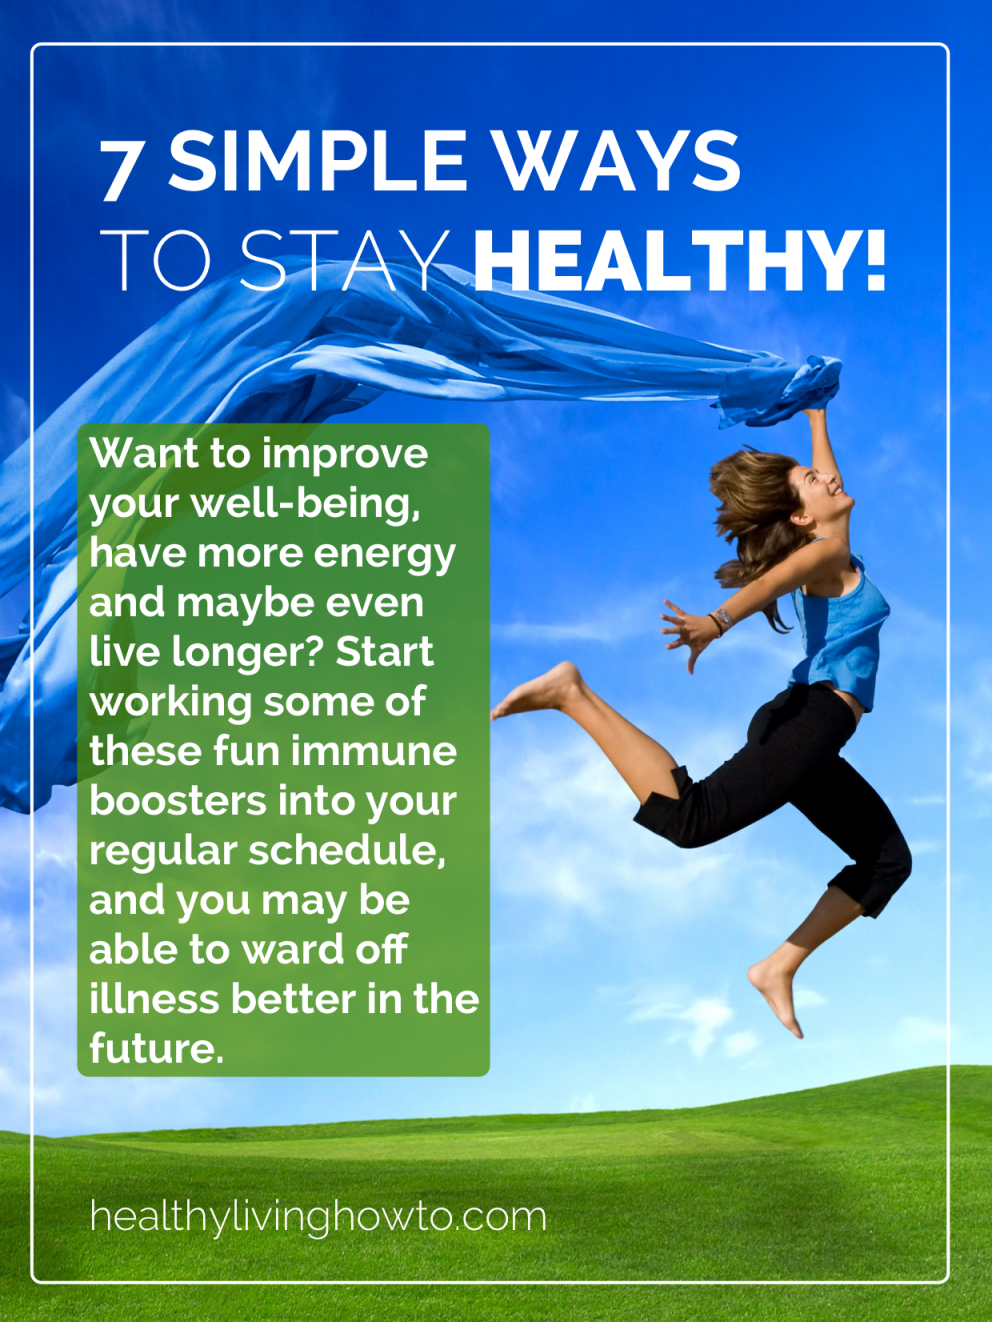 How to live better. What to do to stay healthy. Tips to stay healthy. Healthy way of Life. How to be healthy лексика.